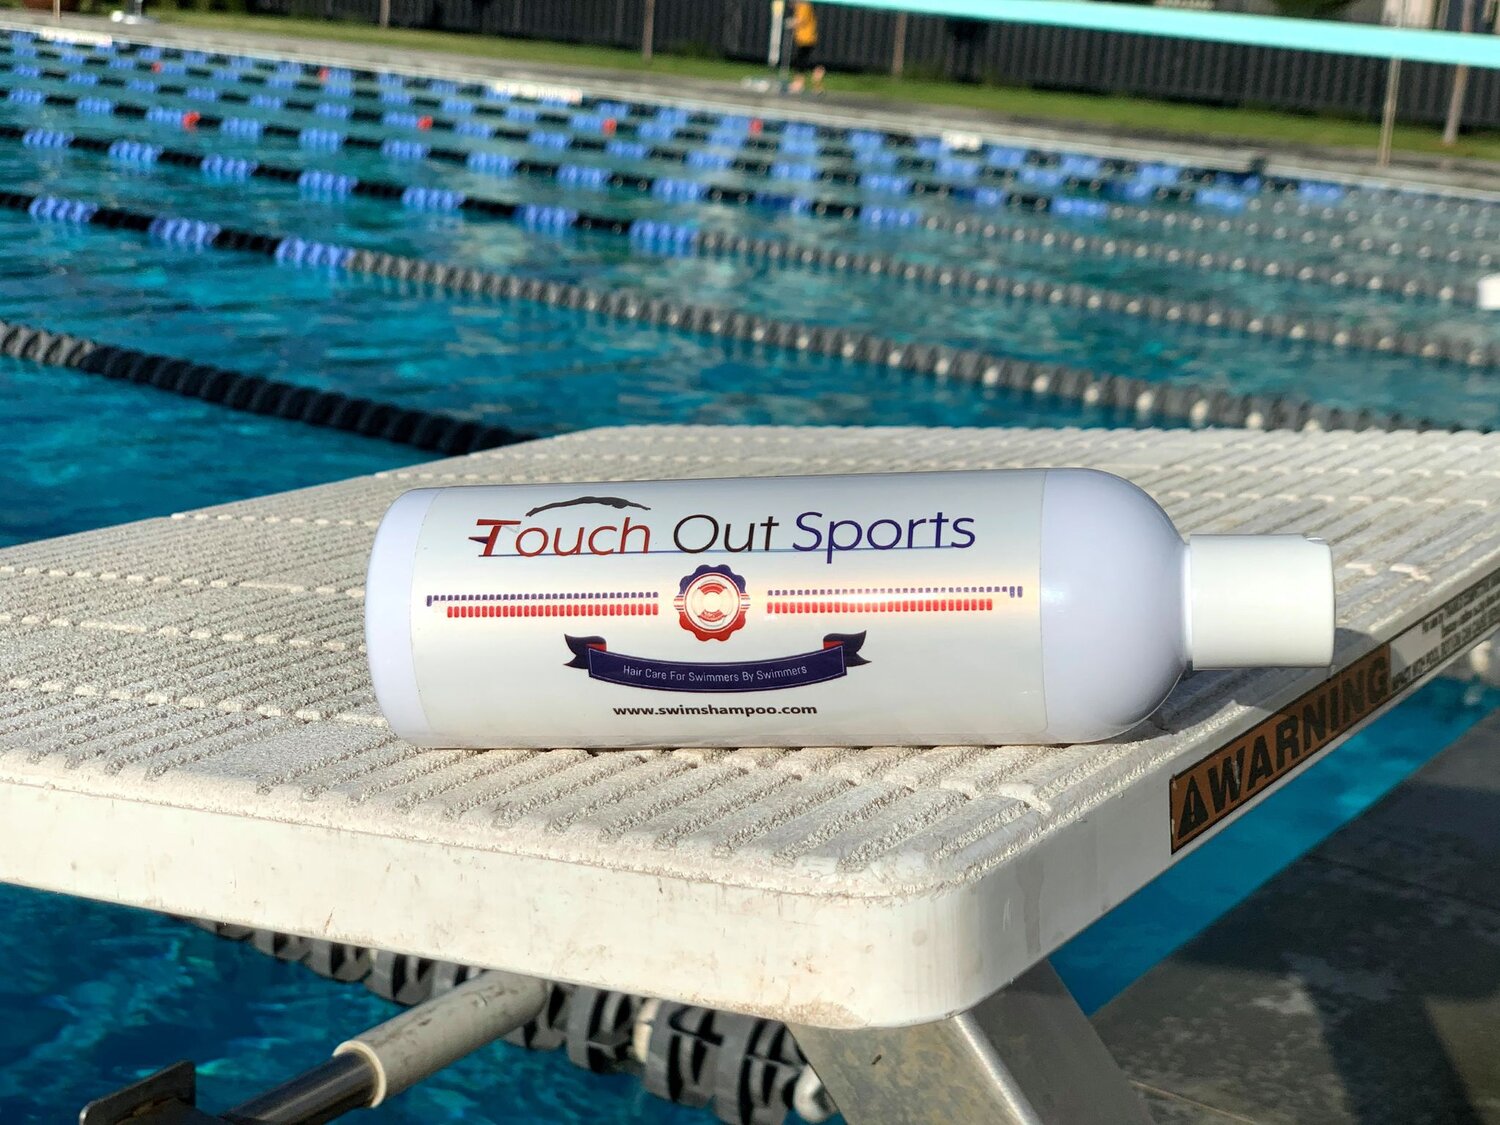 swimmer's shampoo | Hair Care Products Swimmers Touch Sports